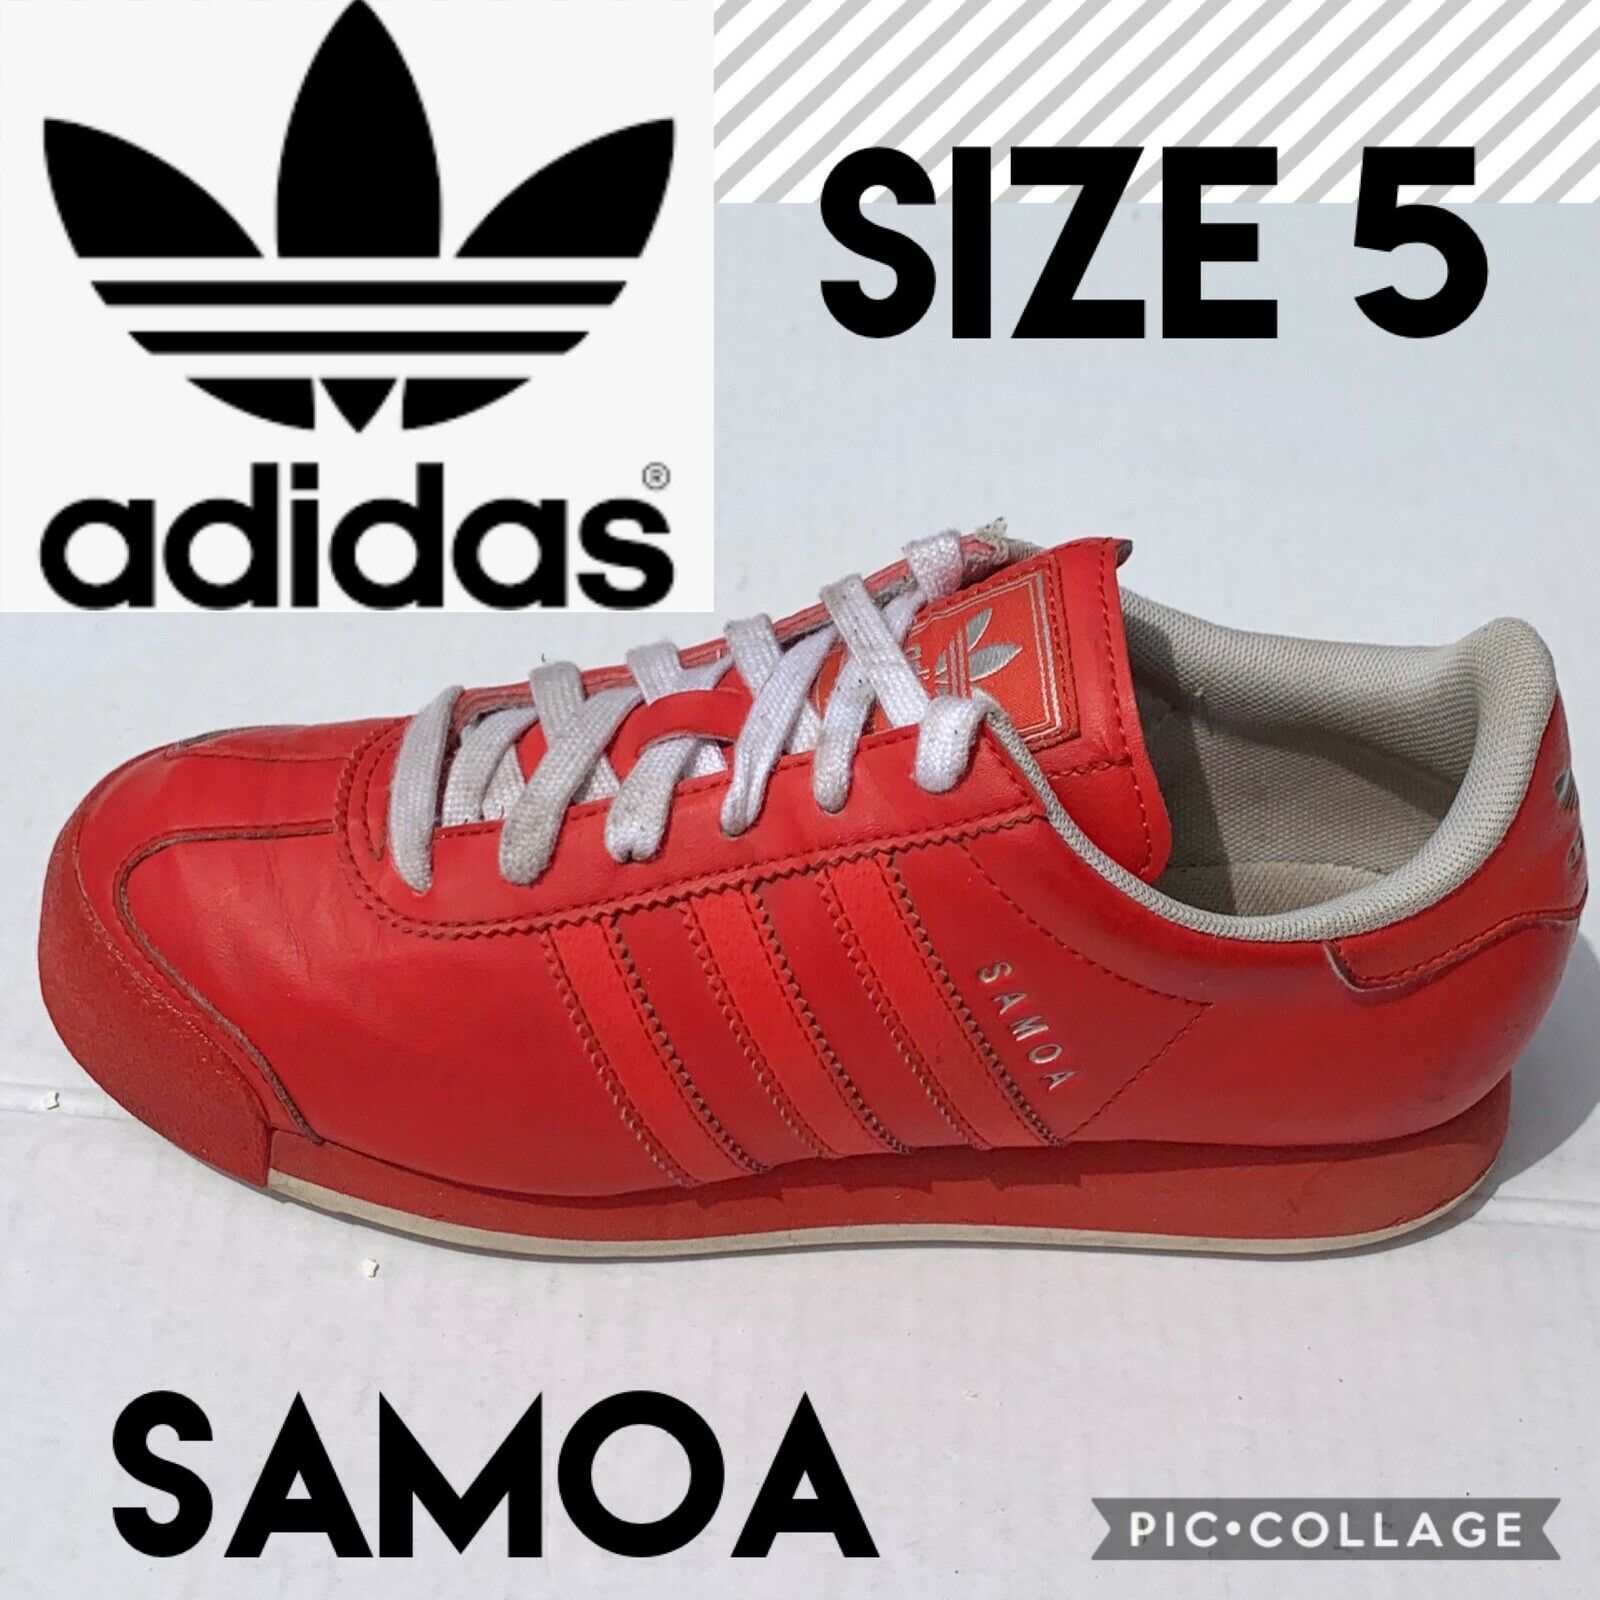 Adidas Mens Shoes Samoa Lush Red Classic Athletic Sneaker Retro Old School US5